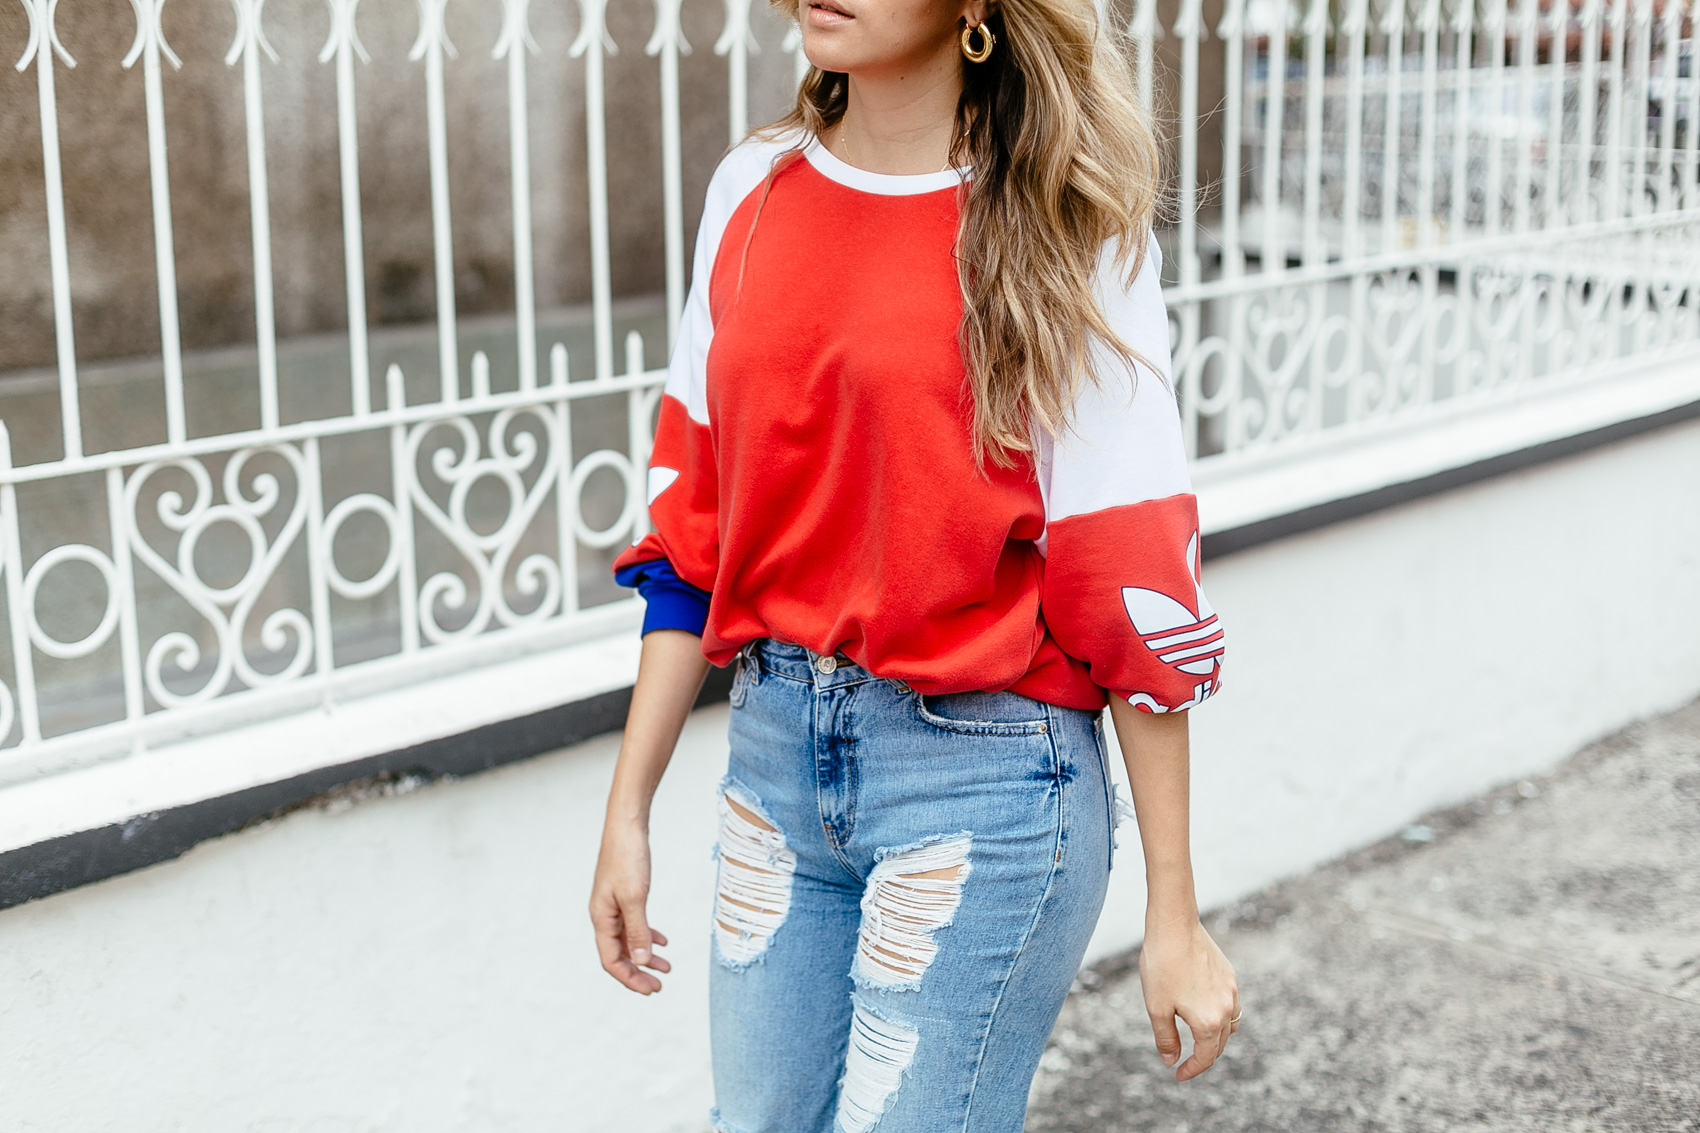 Maristella wearing statement gold earrings, an adidas jumper and ripped jeans